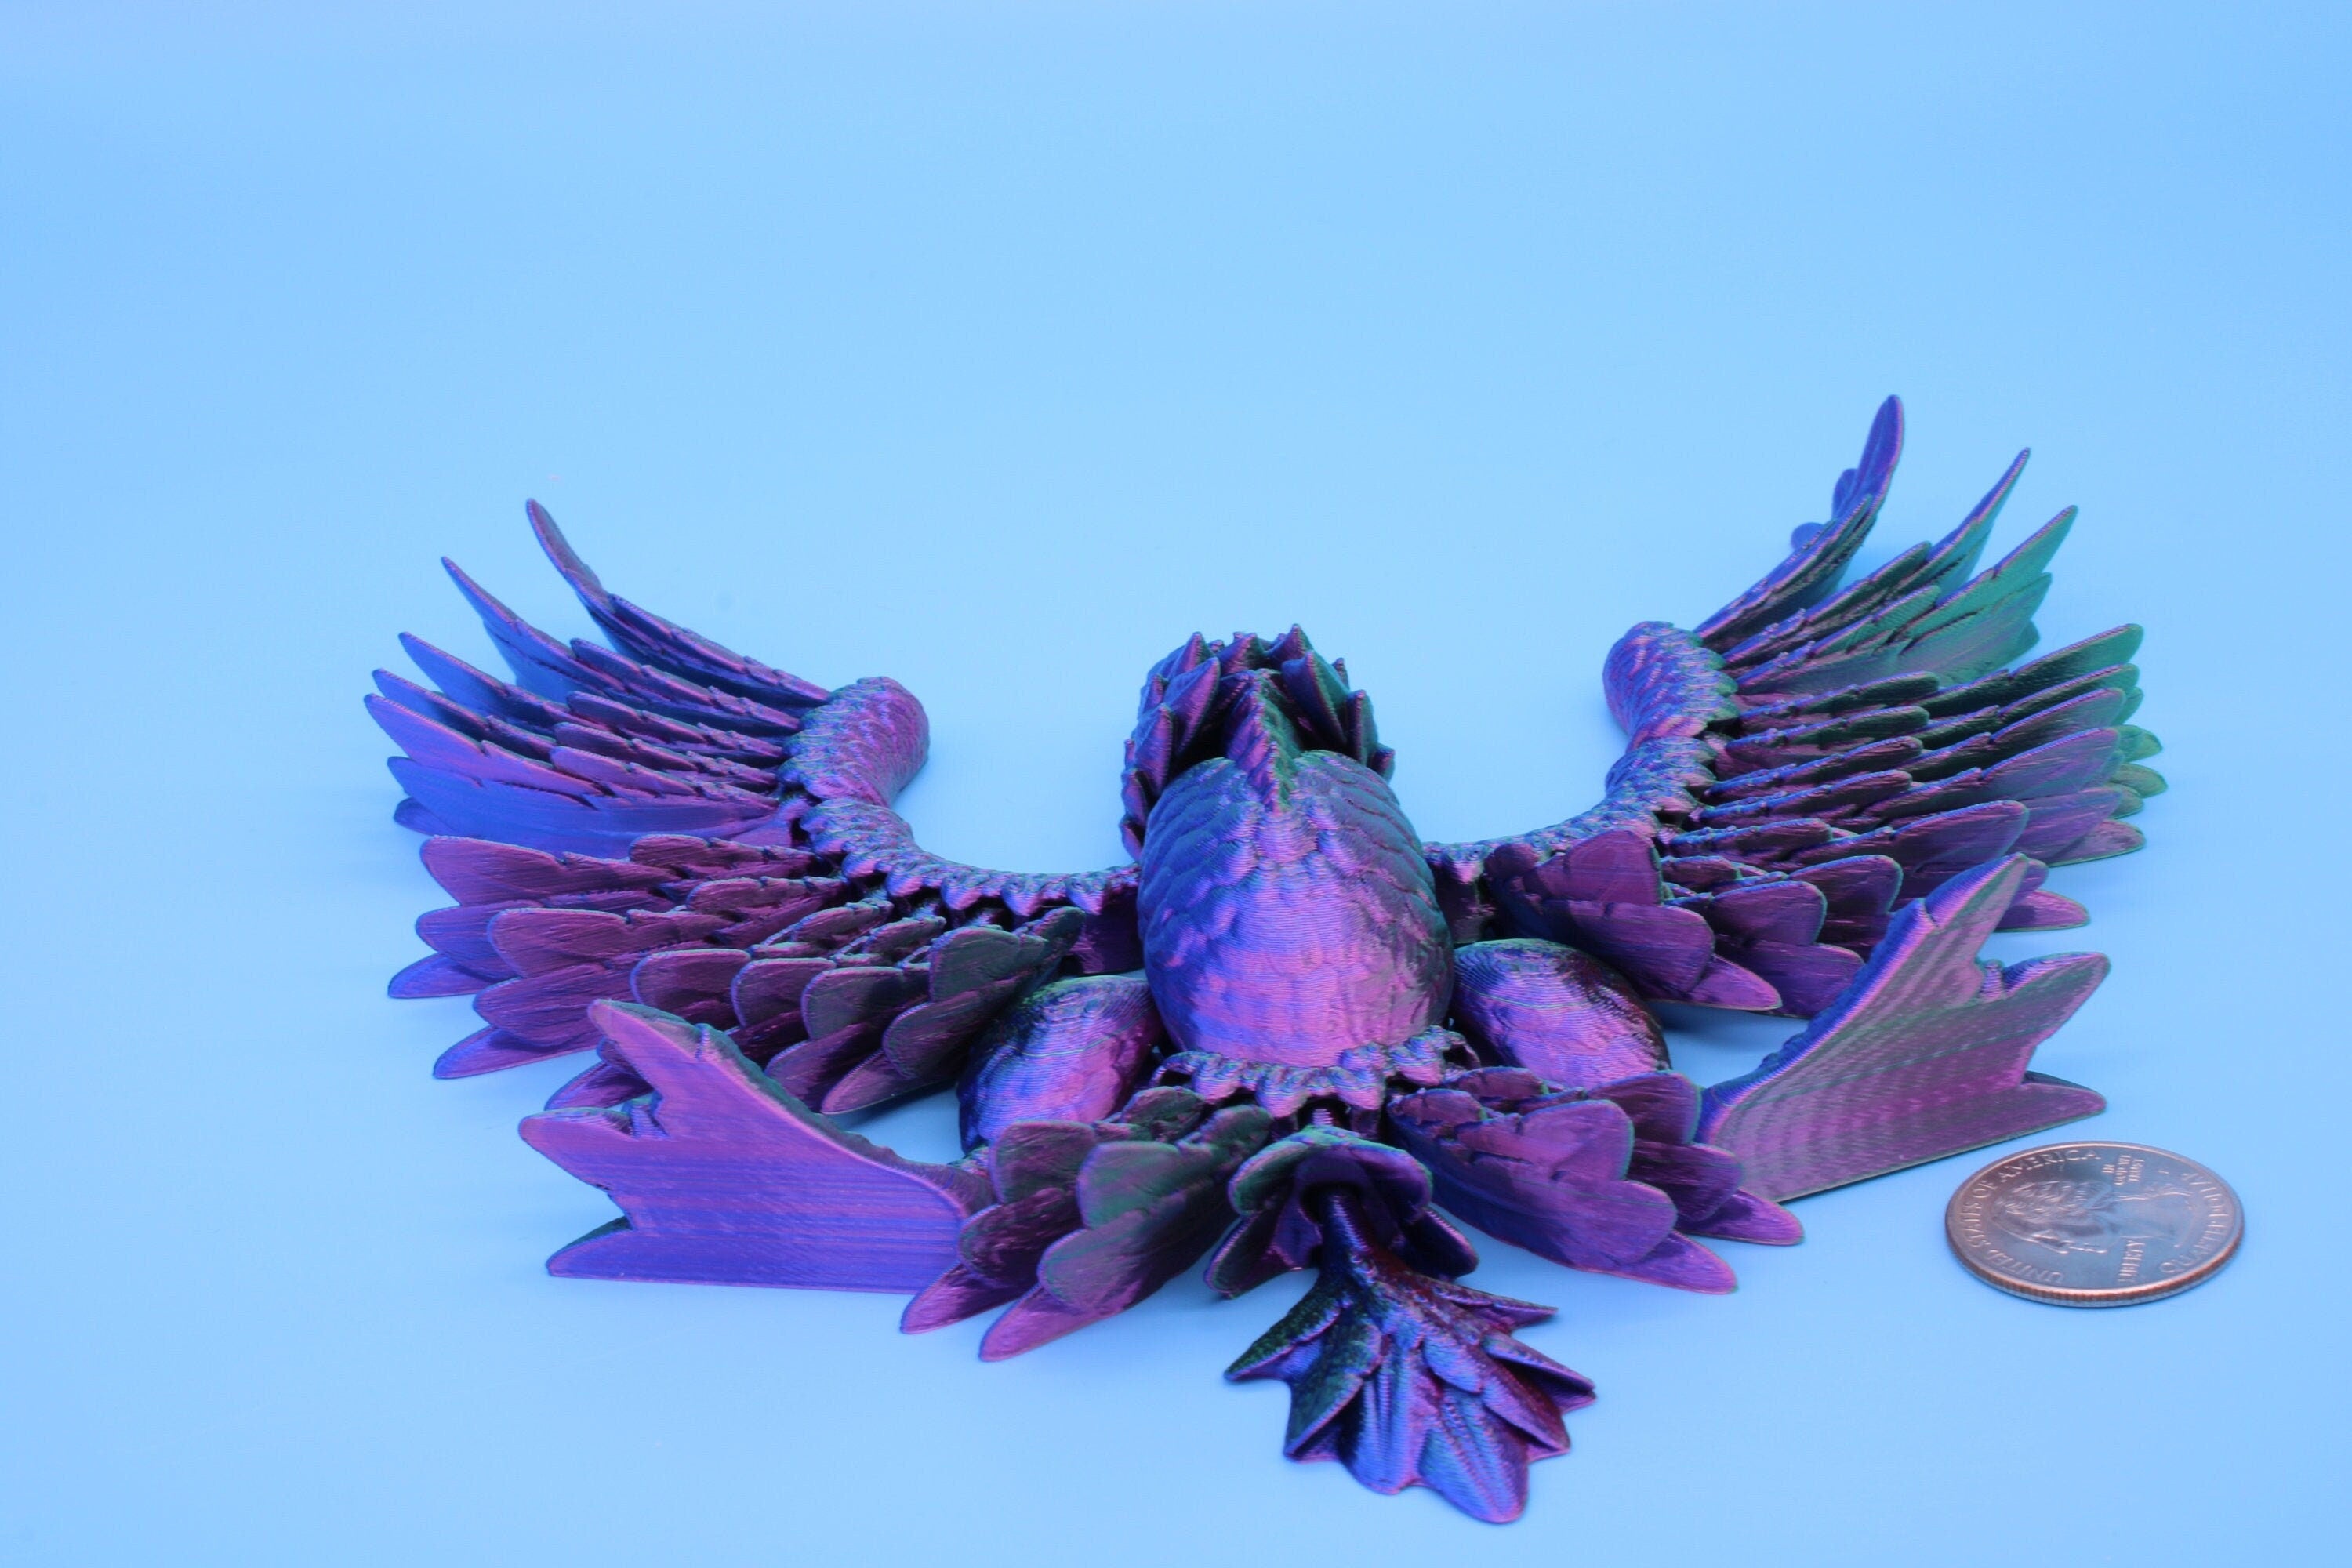 Cute Flexi Multi Color Phoenix. Unique 3D printed. Great Articulating fidget toy, desk, sensory toy. 4 inch Blue, Red, Teal, Green.